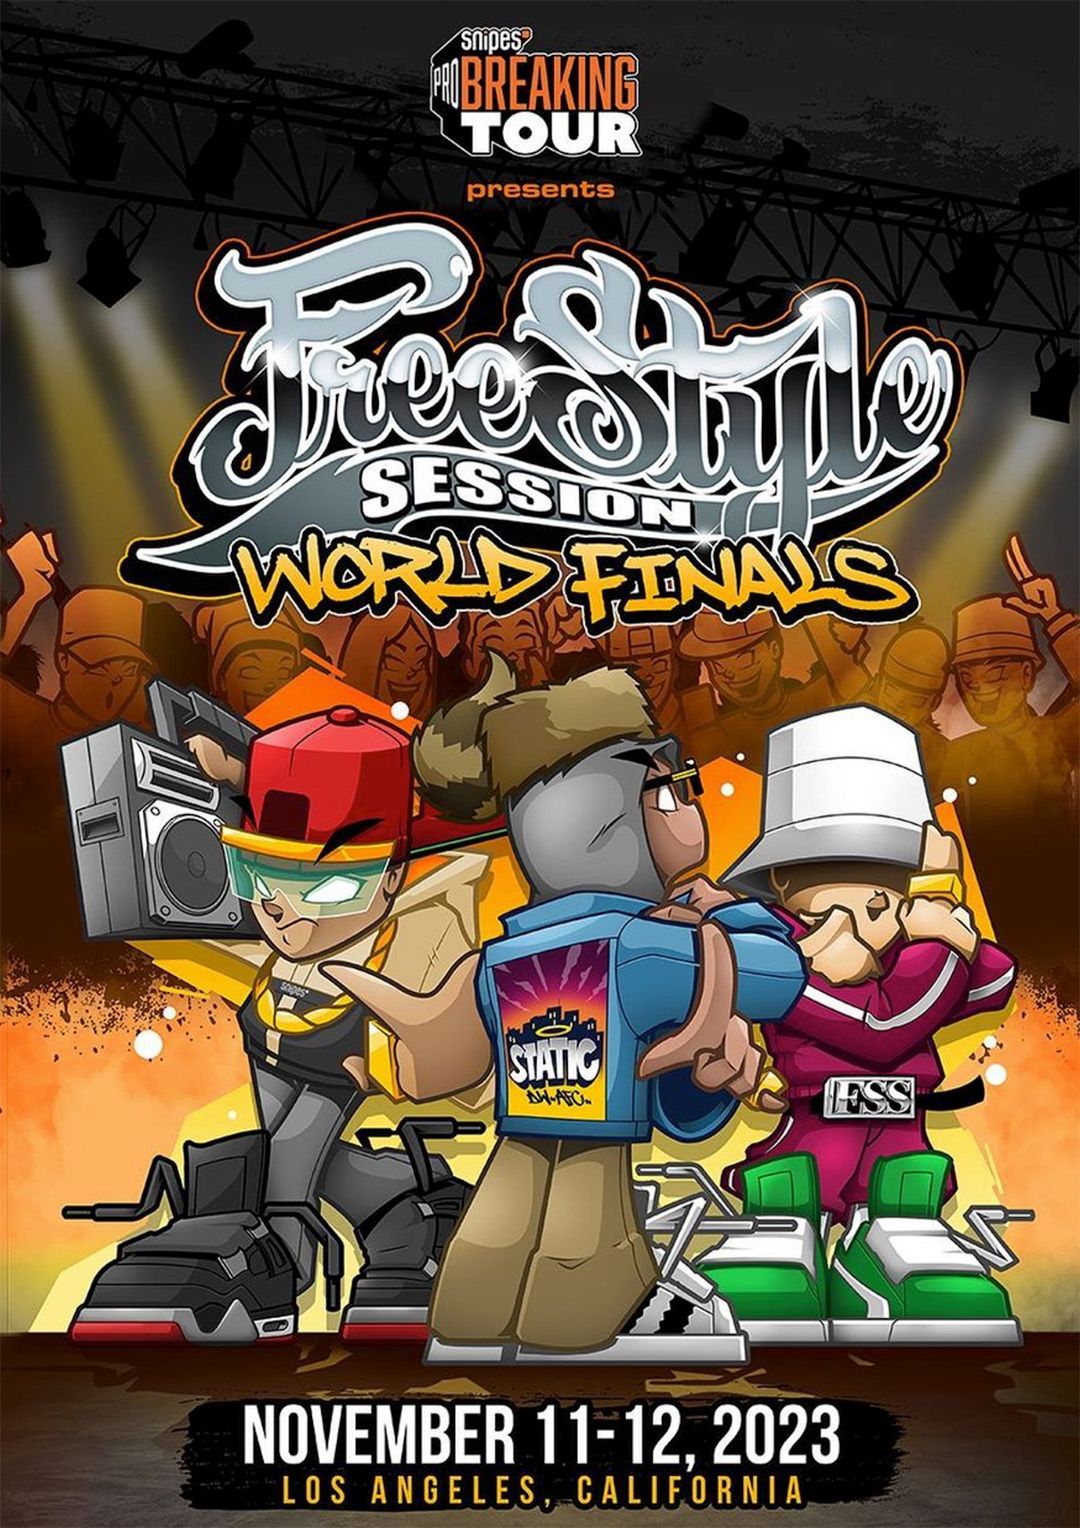 Freestyle Session 2023 World Finals